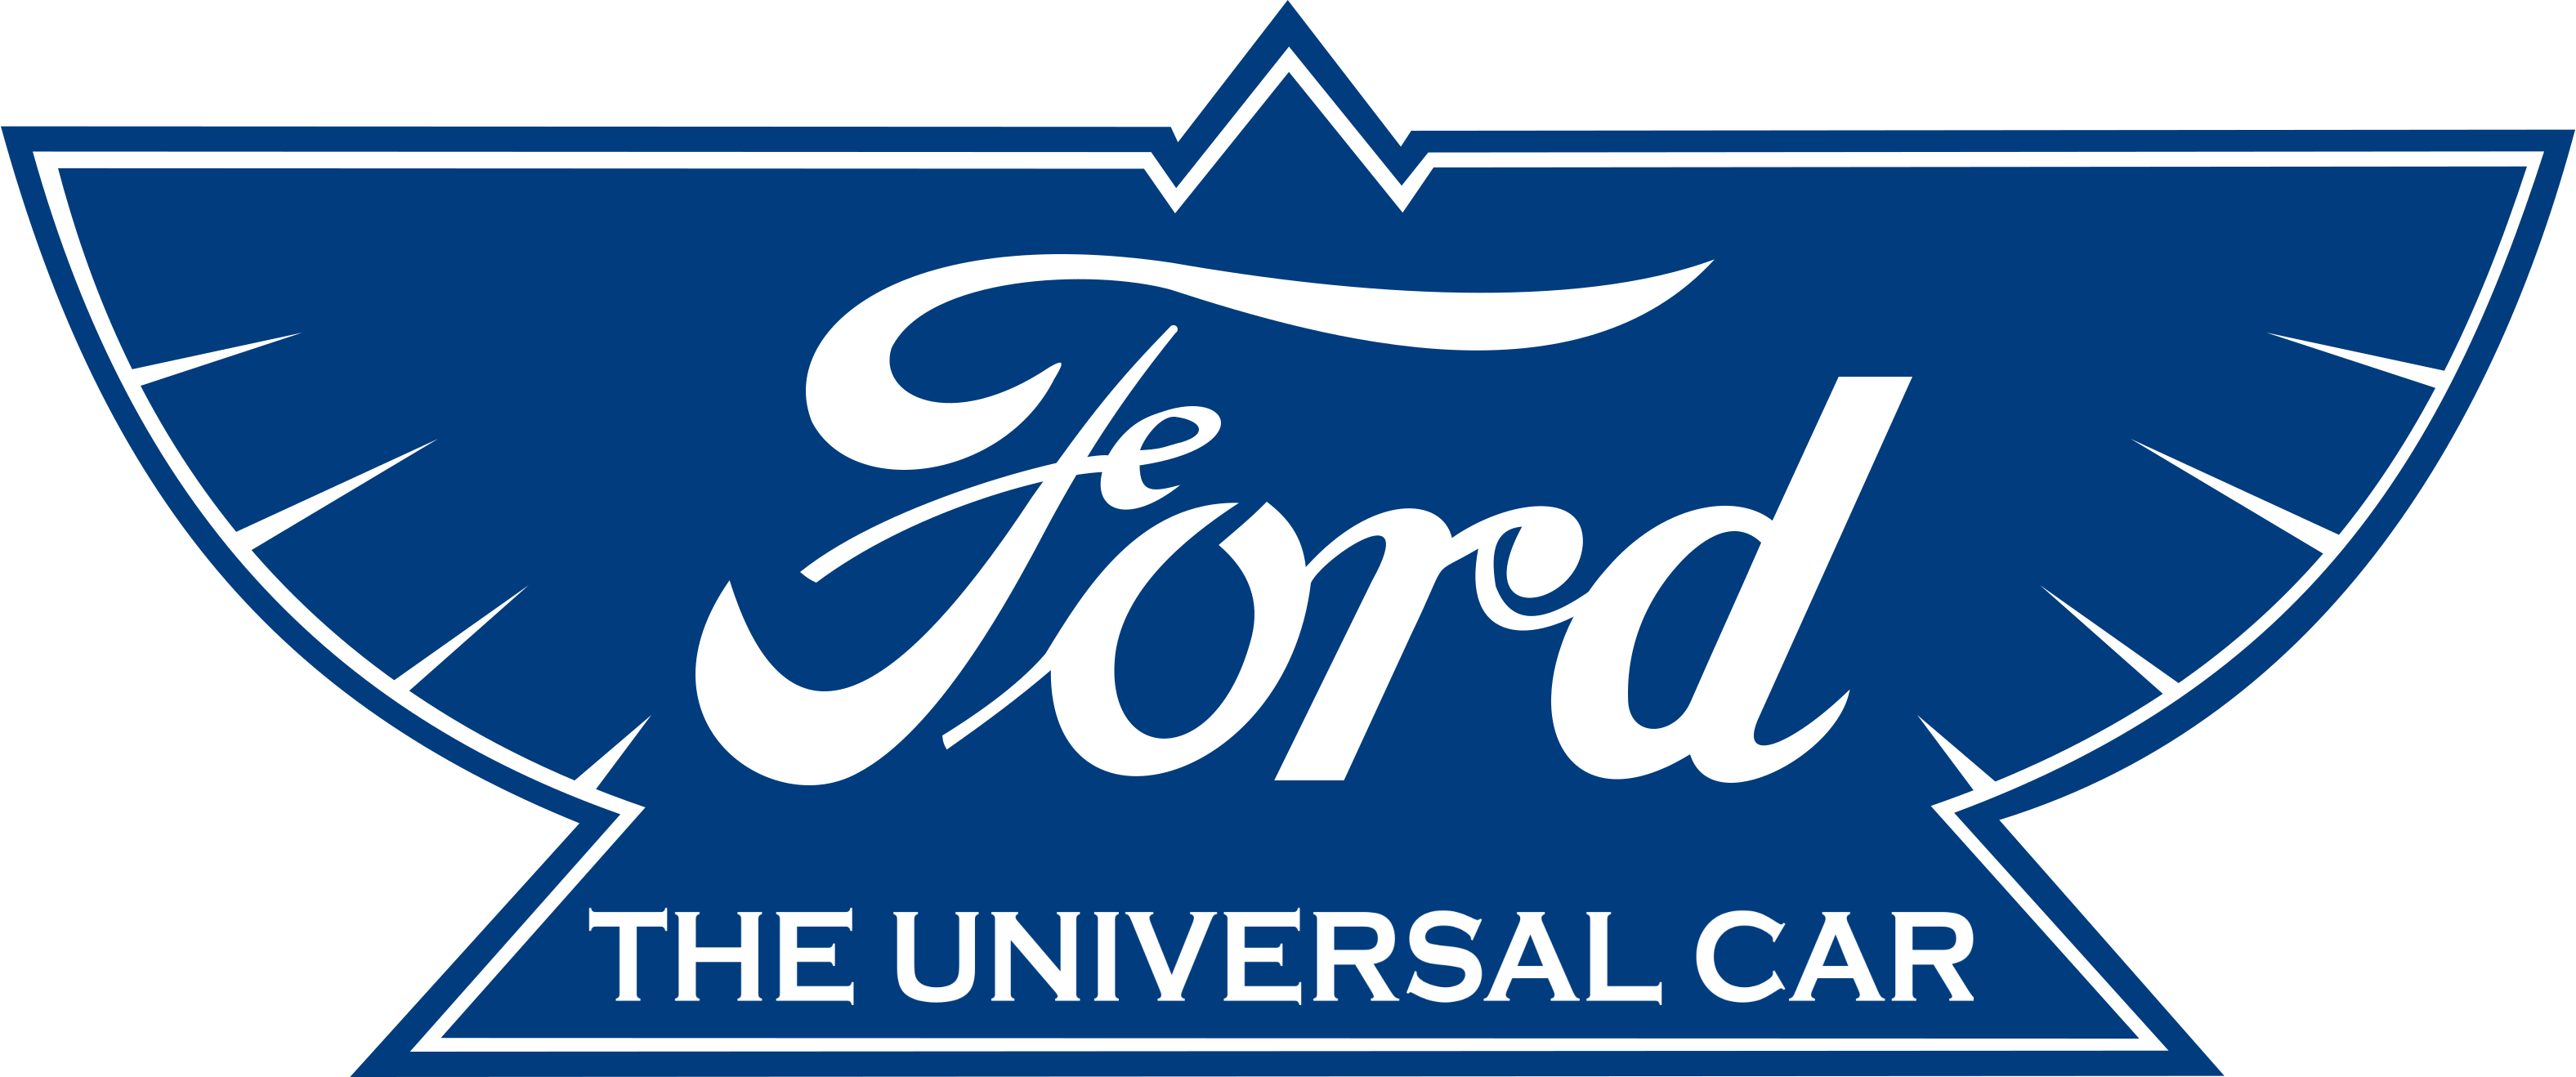 File:Ford logo.svg - Wikimedia Commons